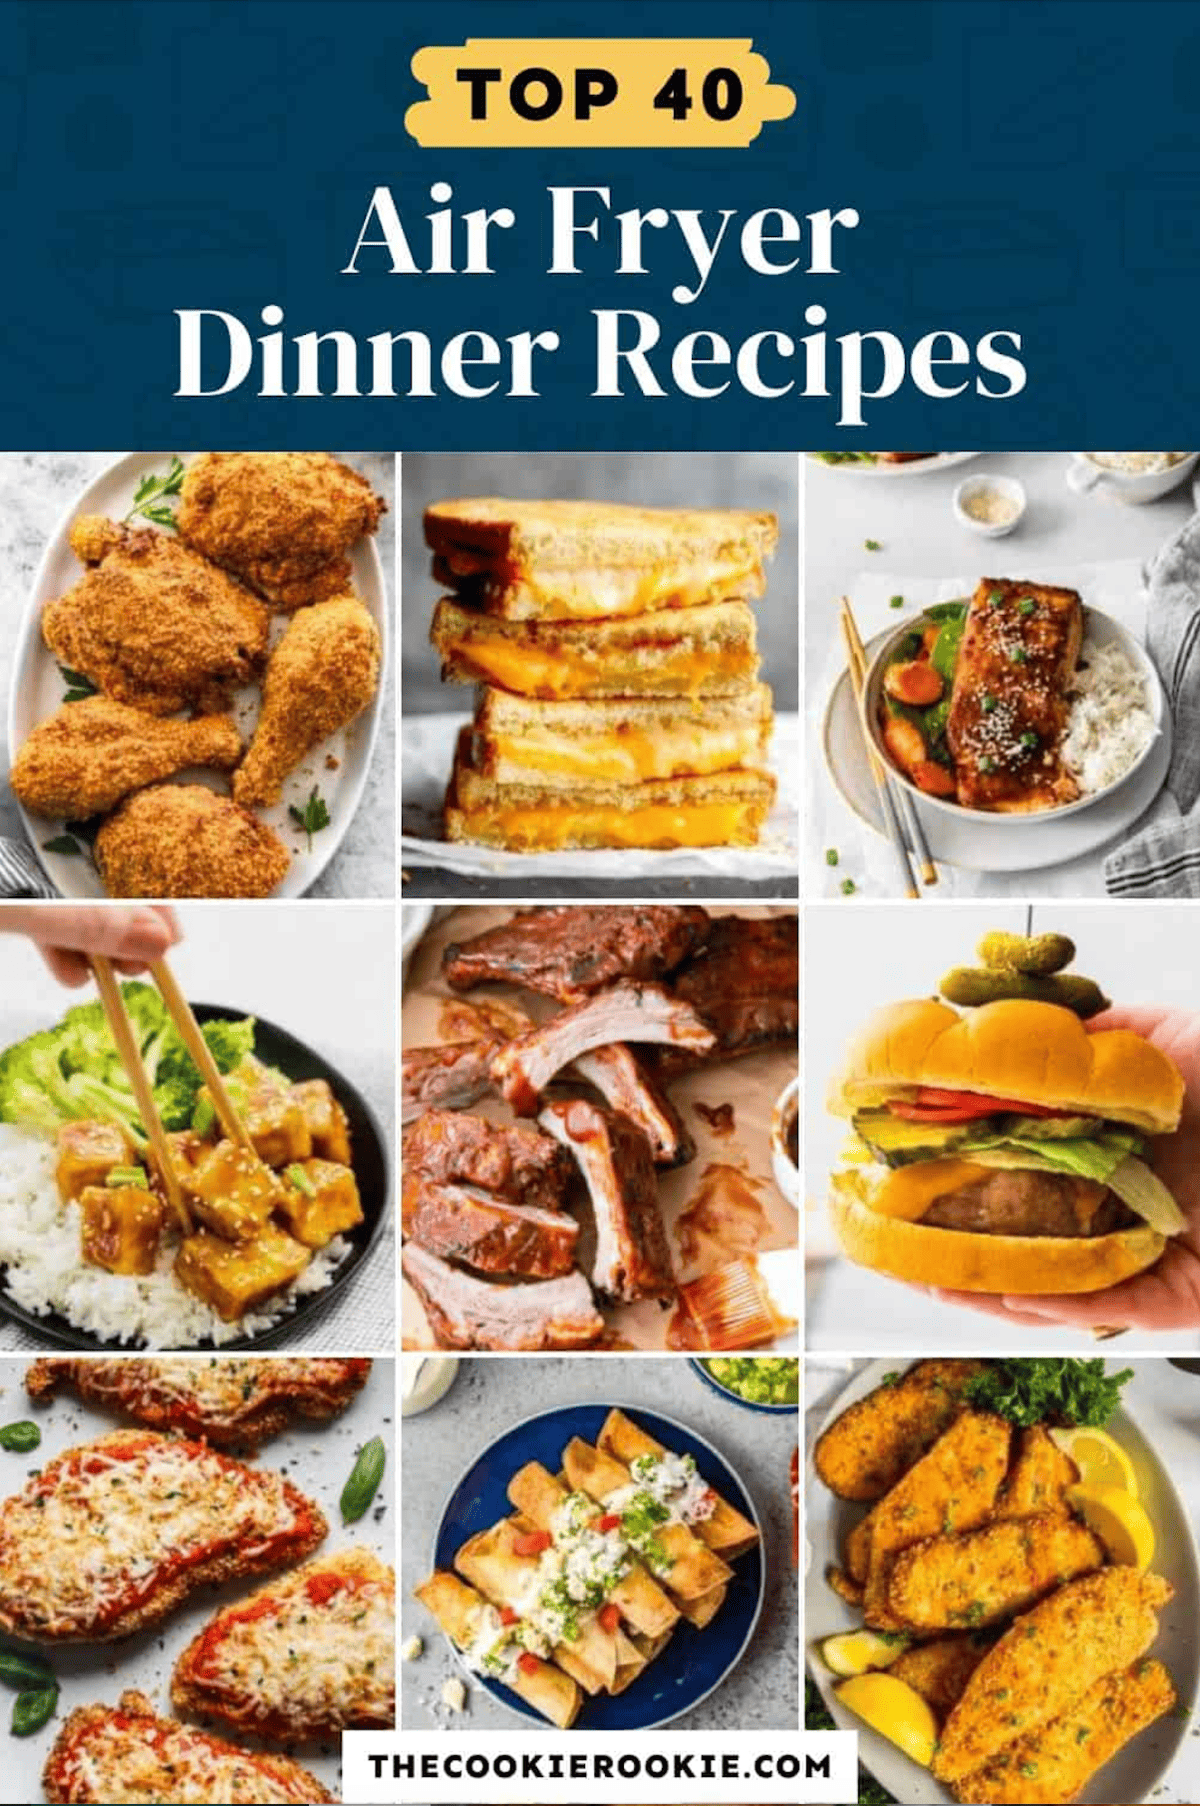 600+ Dinner Recipes and Easy Dinner Ideas - The Cookie Rookie